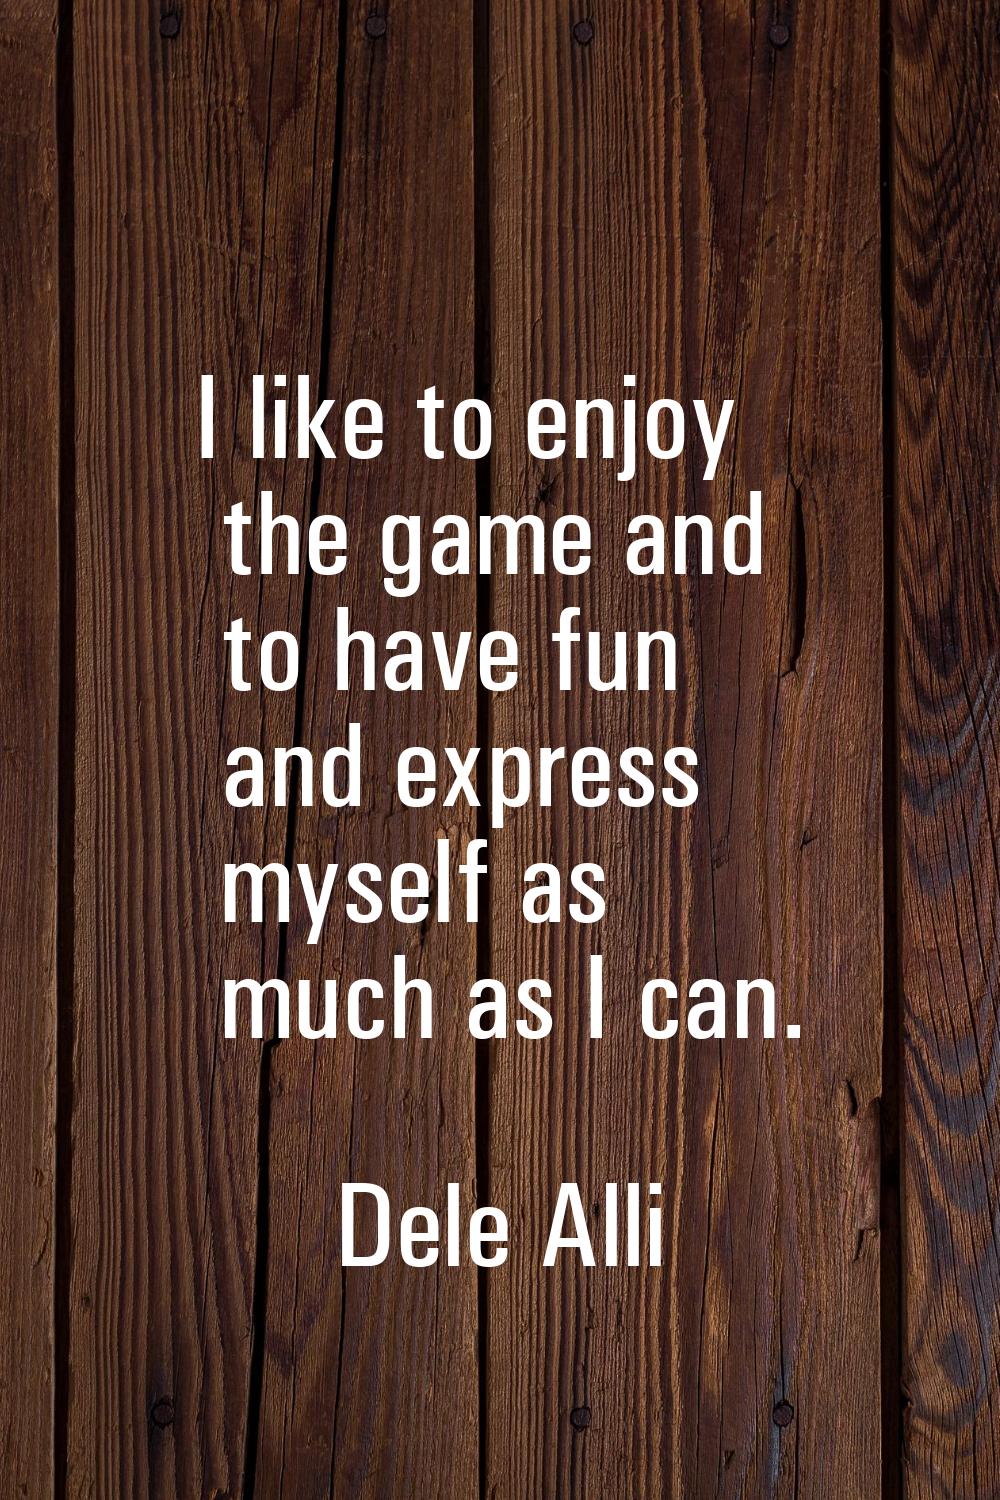 I like to enjoy the game and to have fun and express myself as much as I can.